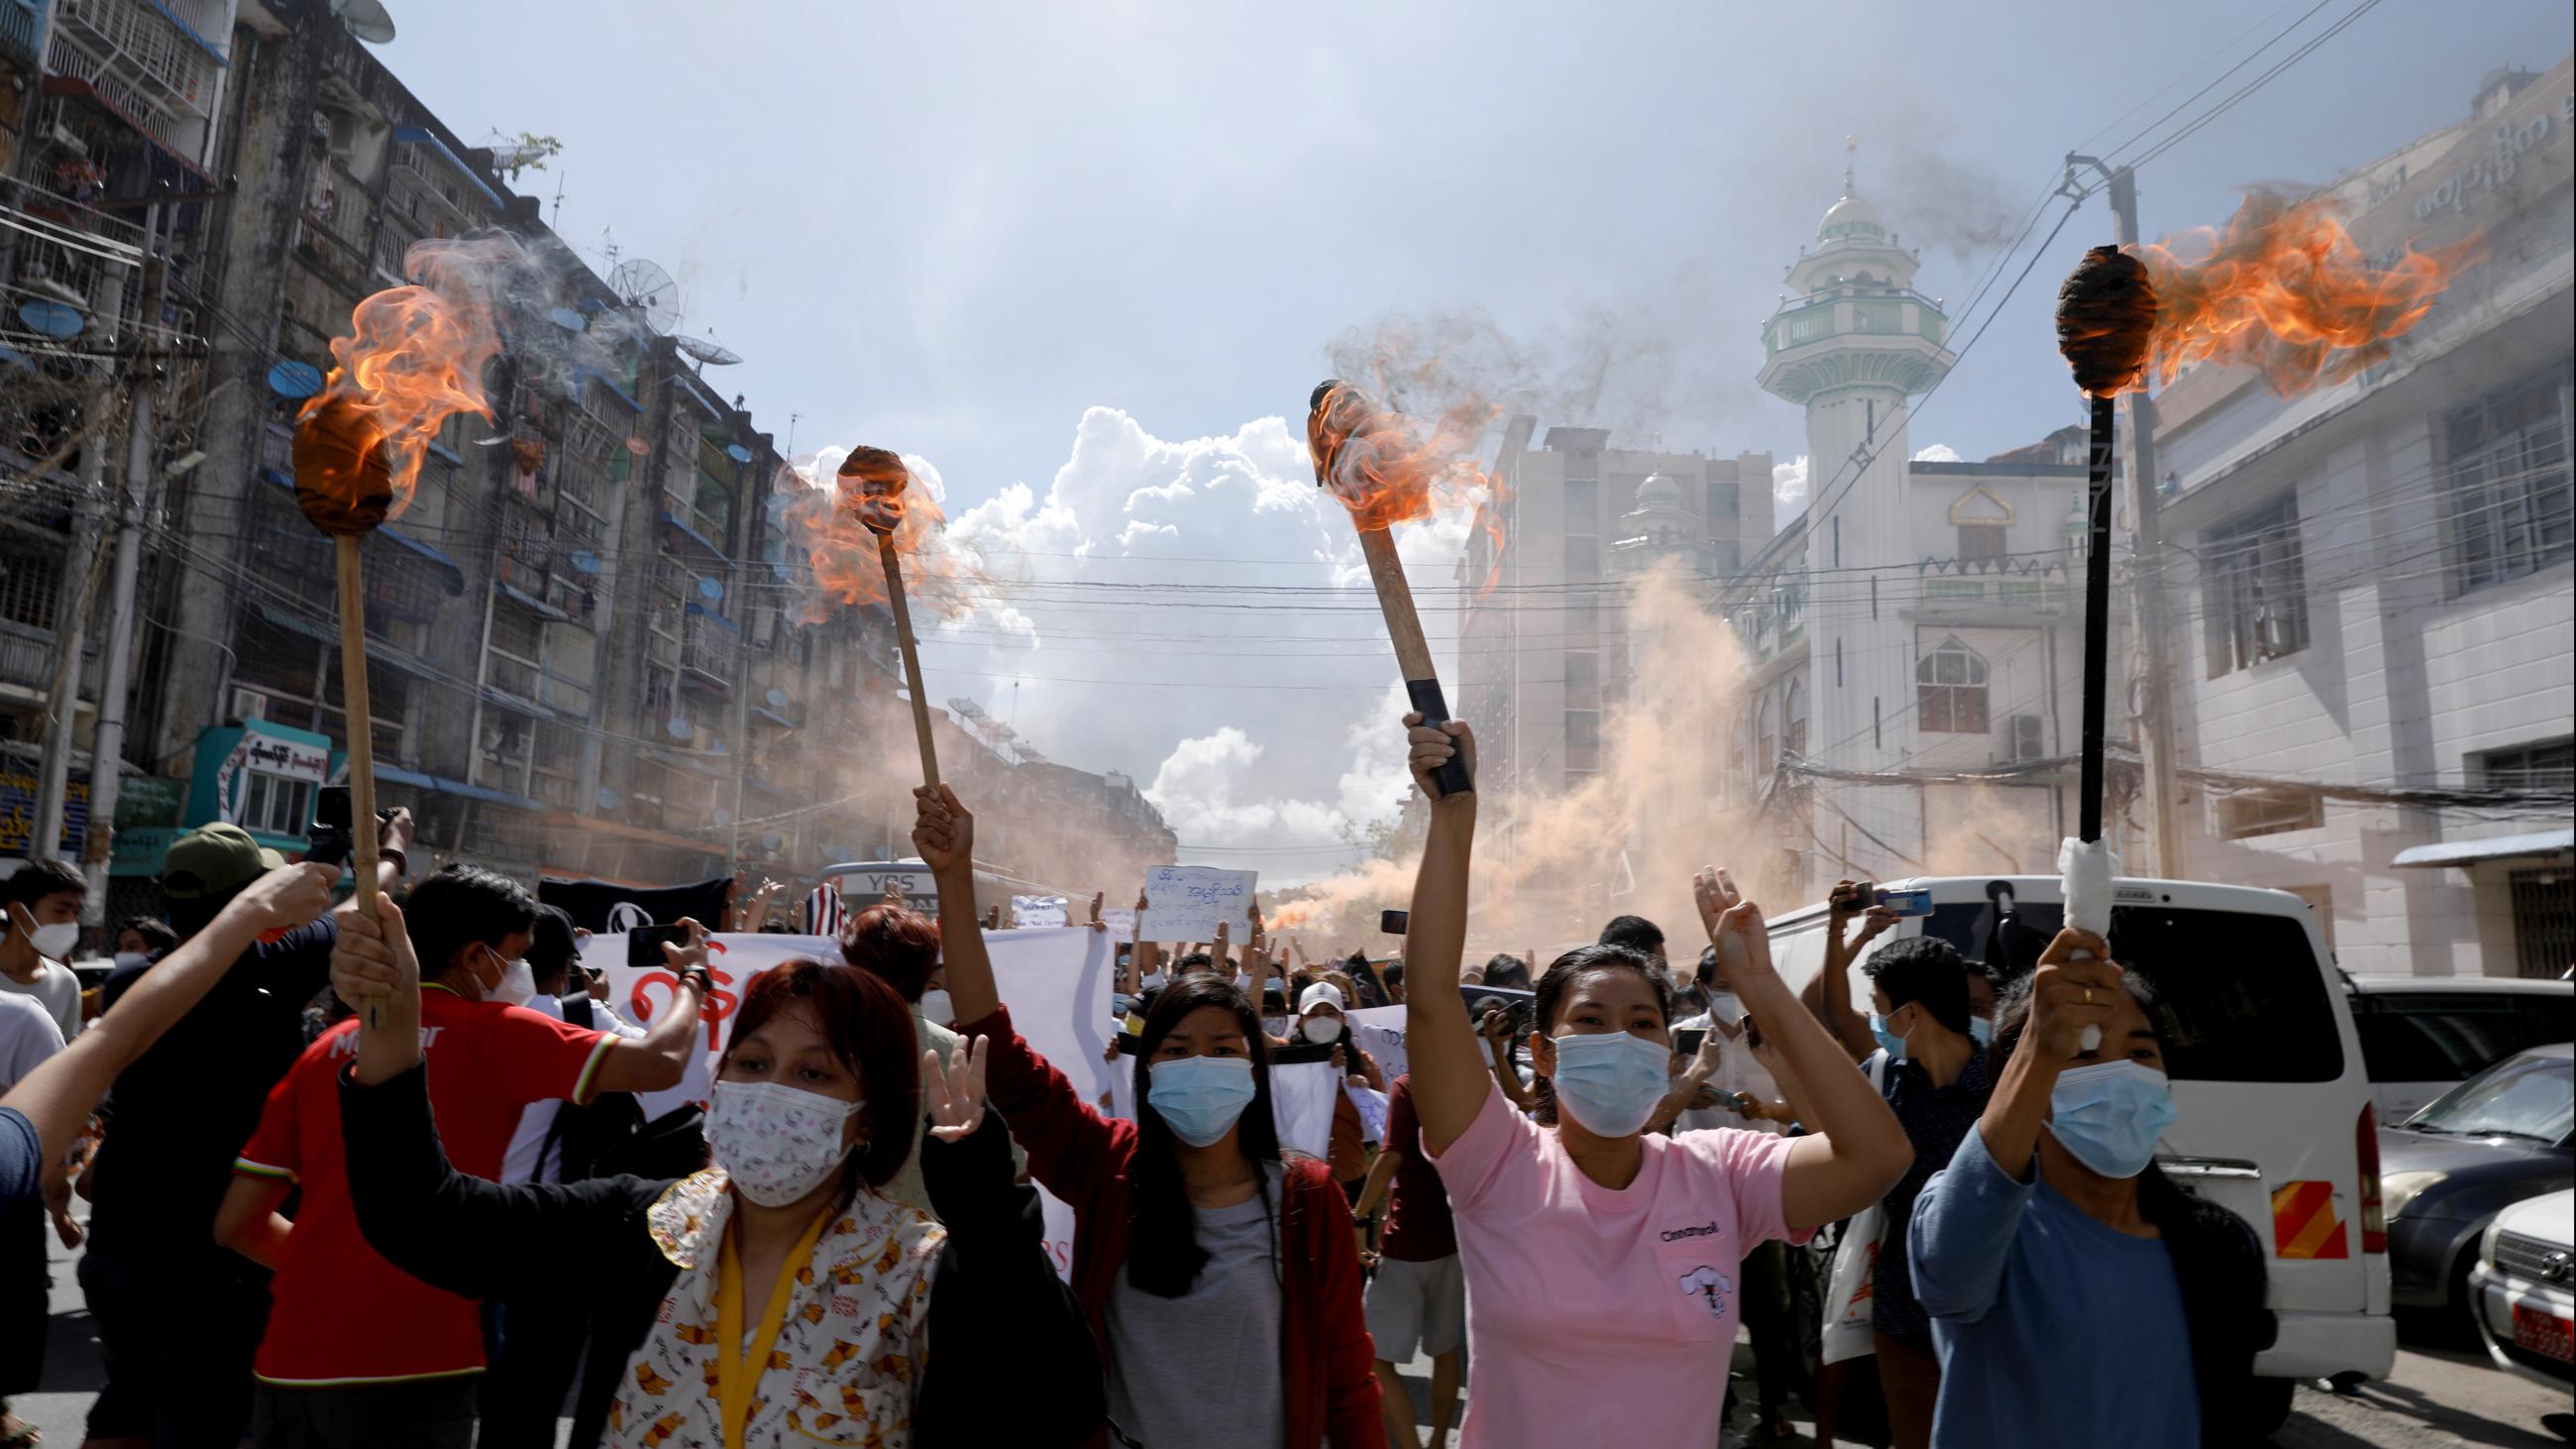  a group of women hold torches to protest the military coup in Yangon, Myanmar